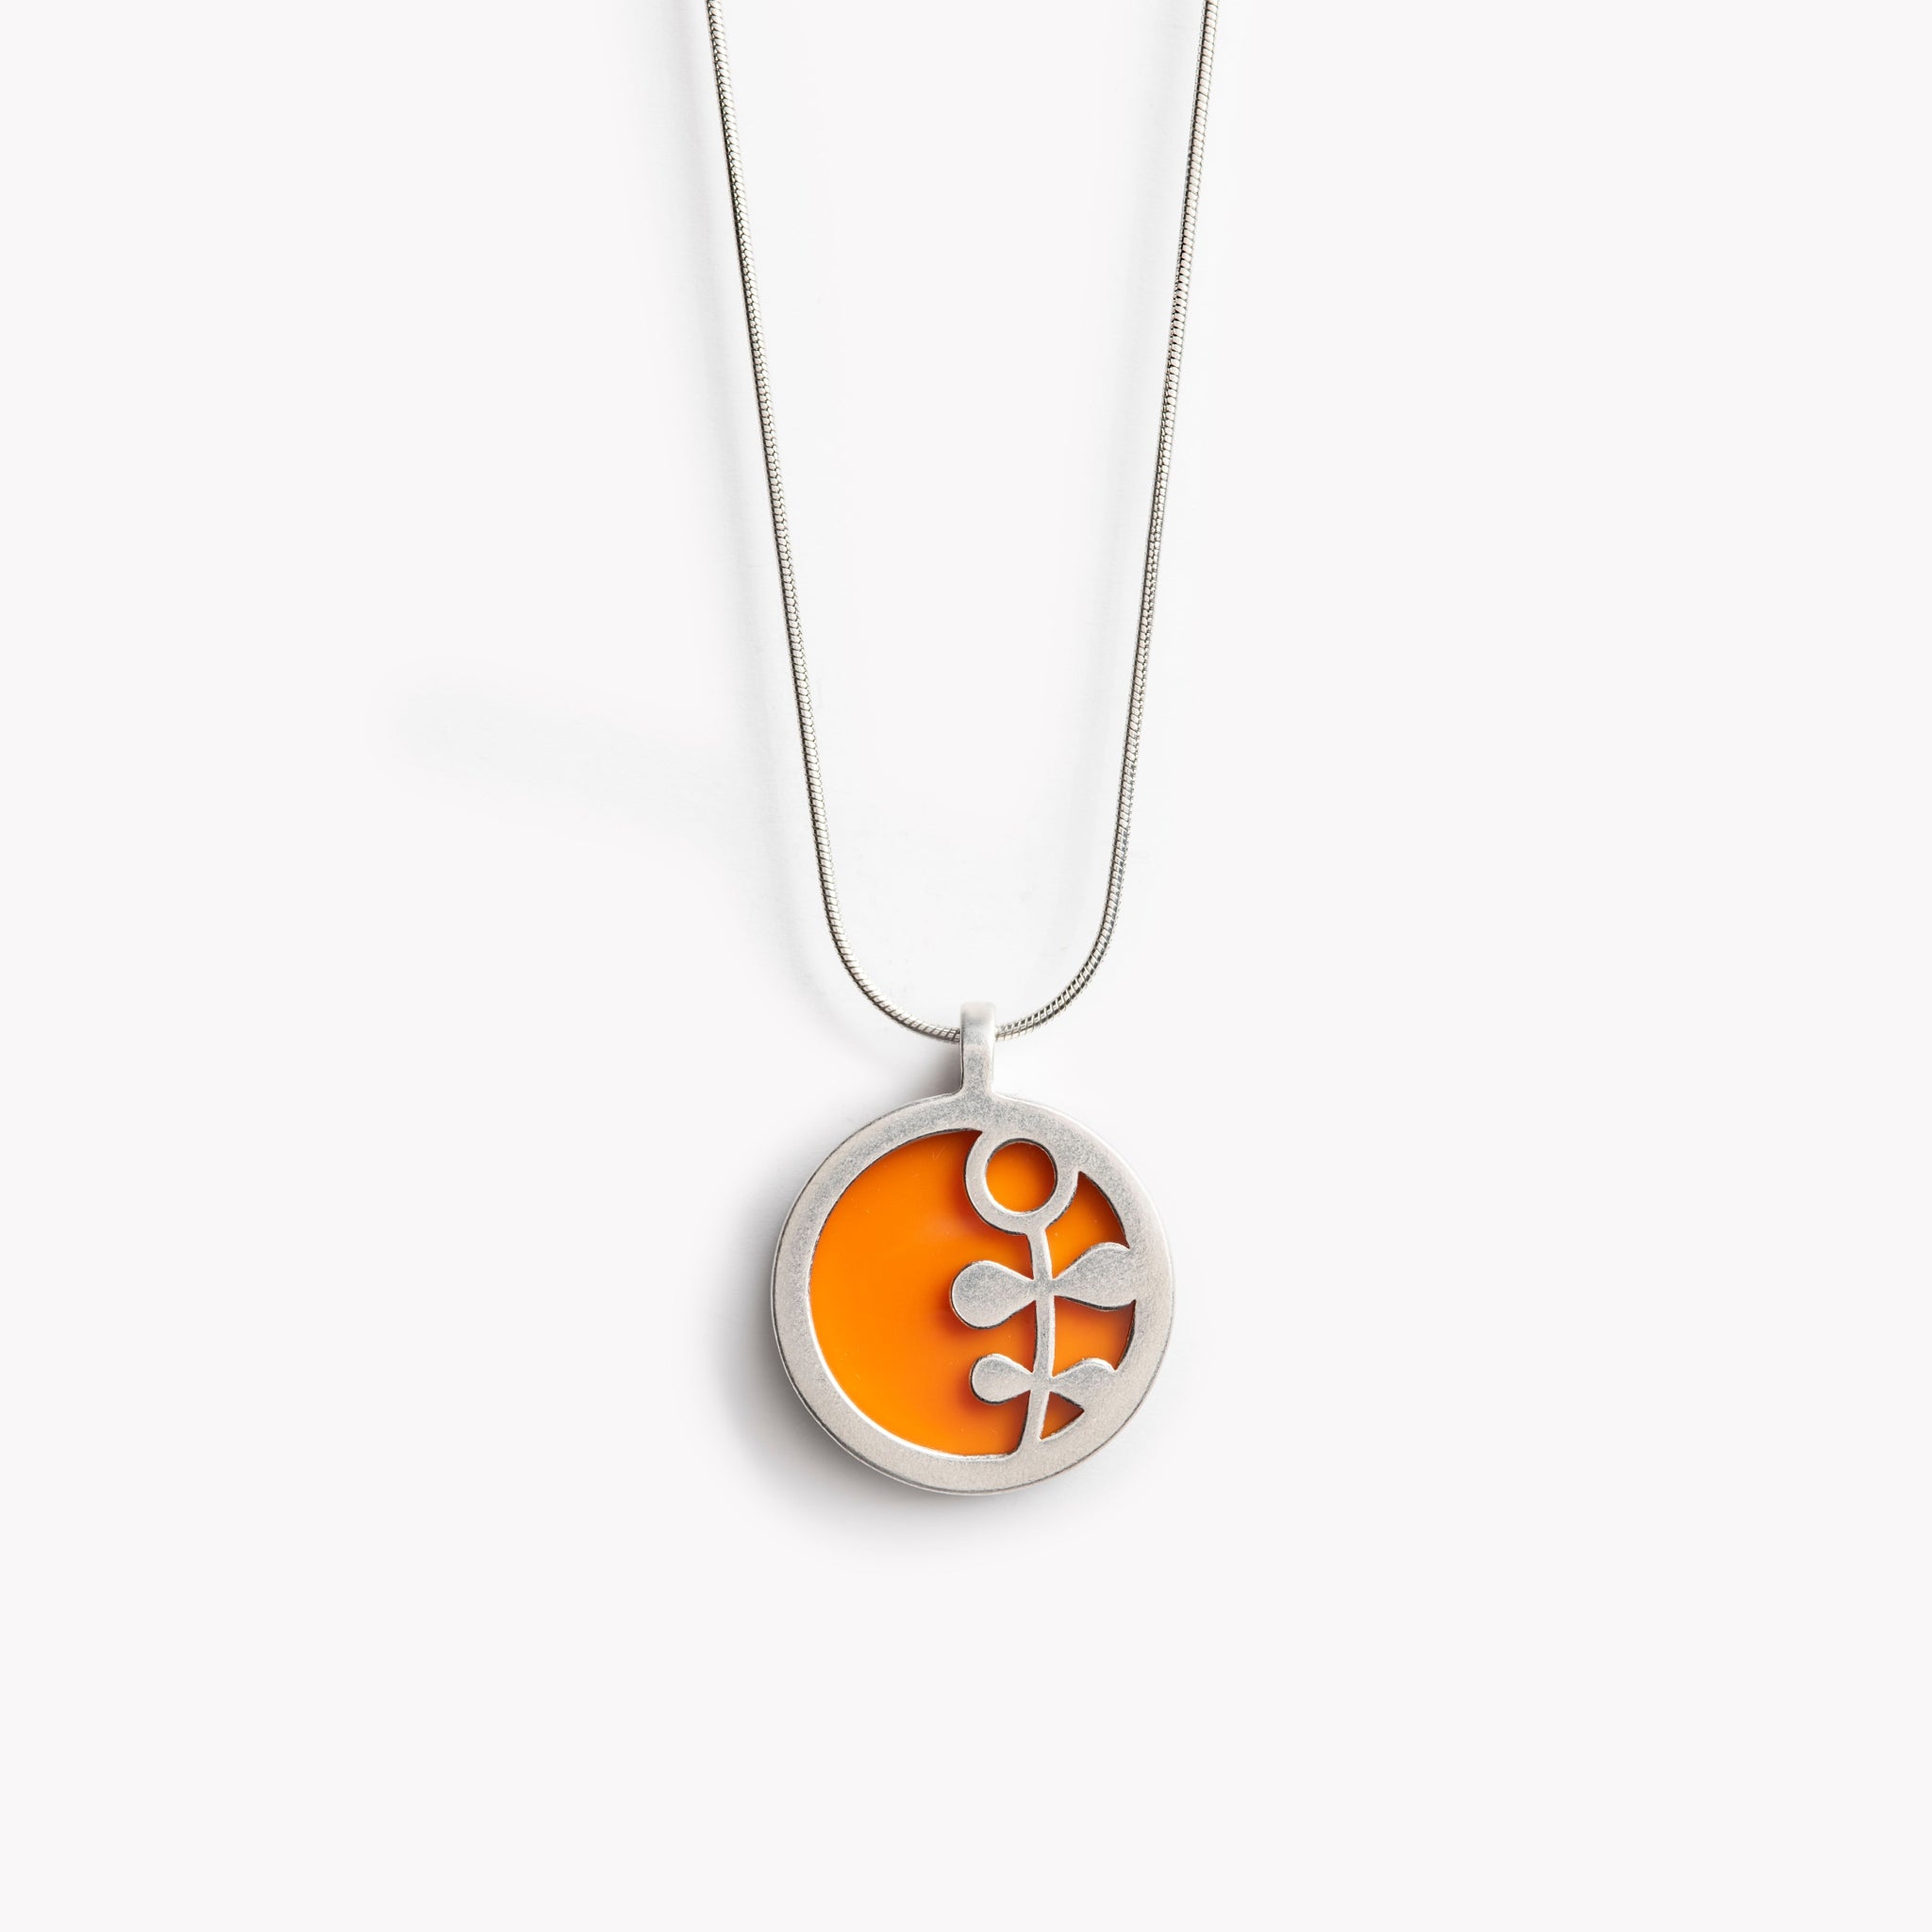 The image shows a circular pendant with a simple Scandinavian style flower stem design.  It has a citrus orange inset which is surrounded by brightly polished pewter, with the flower  stem also highlighted in polished pewter. The pendant is bathed in sunlight on a crisp white  background. This is a simple yet vibrant, modern and colourful pendant necklace design.